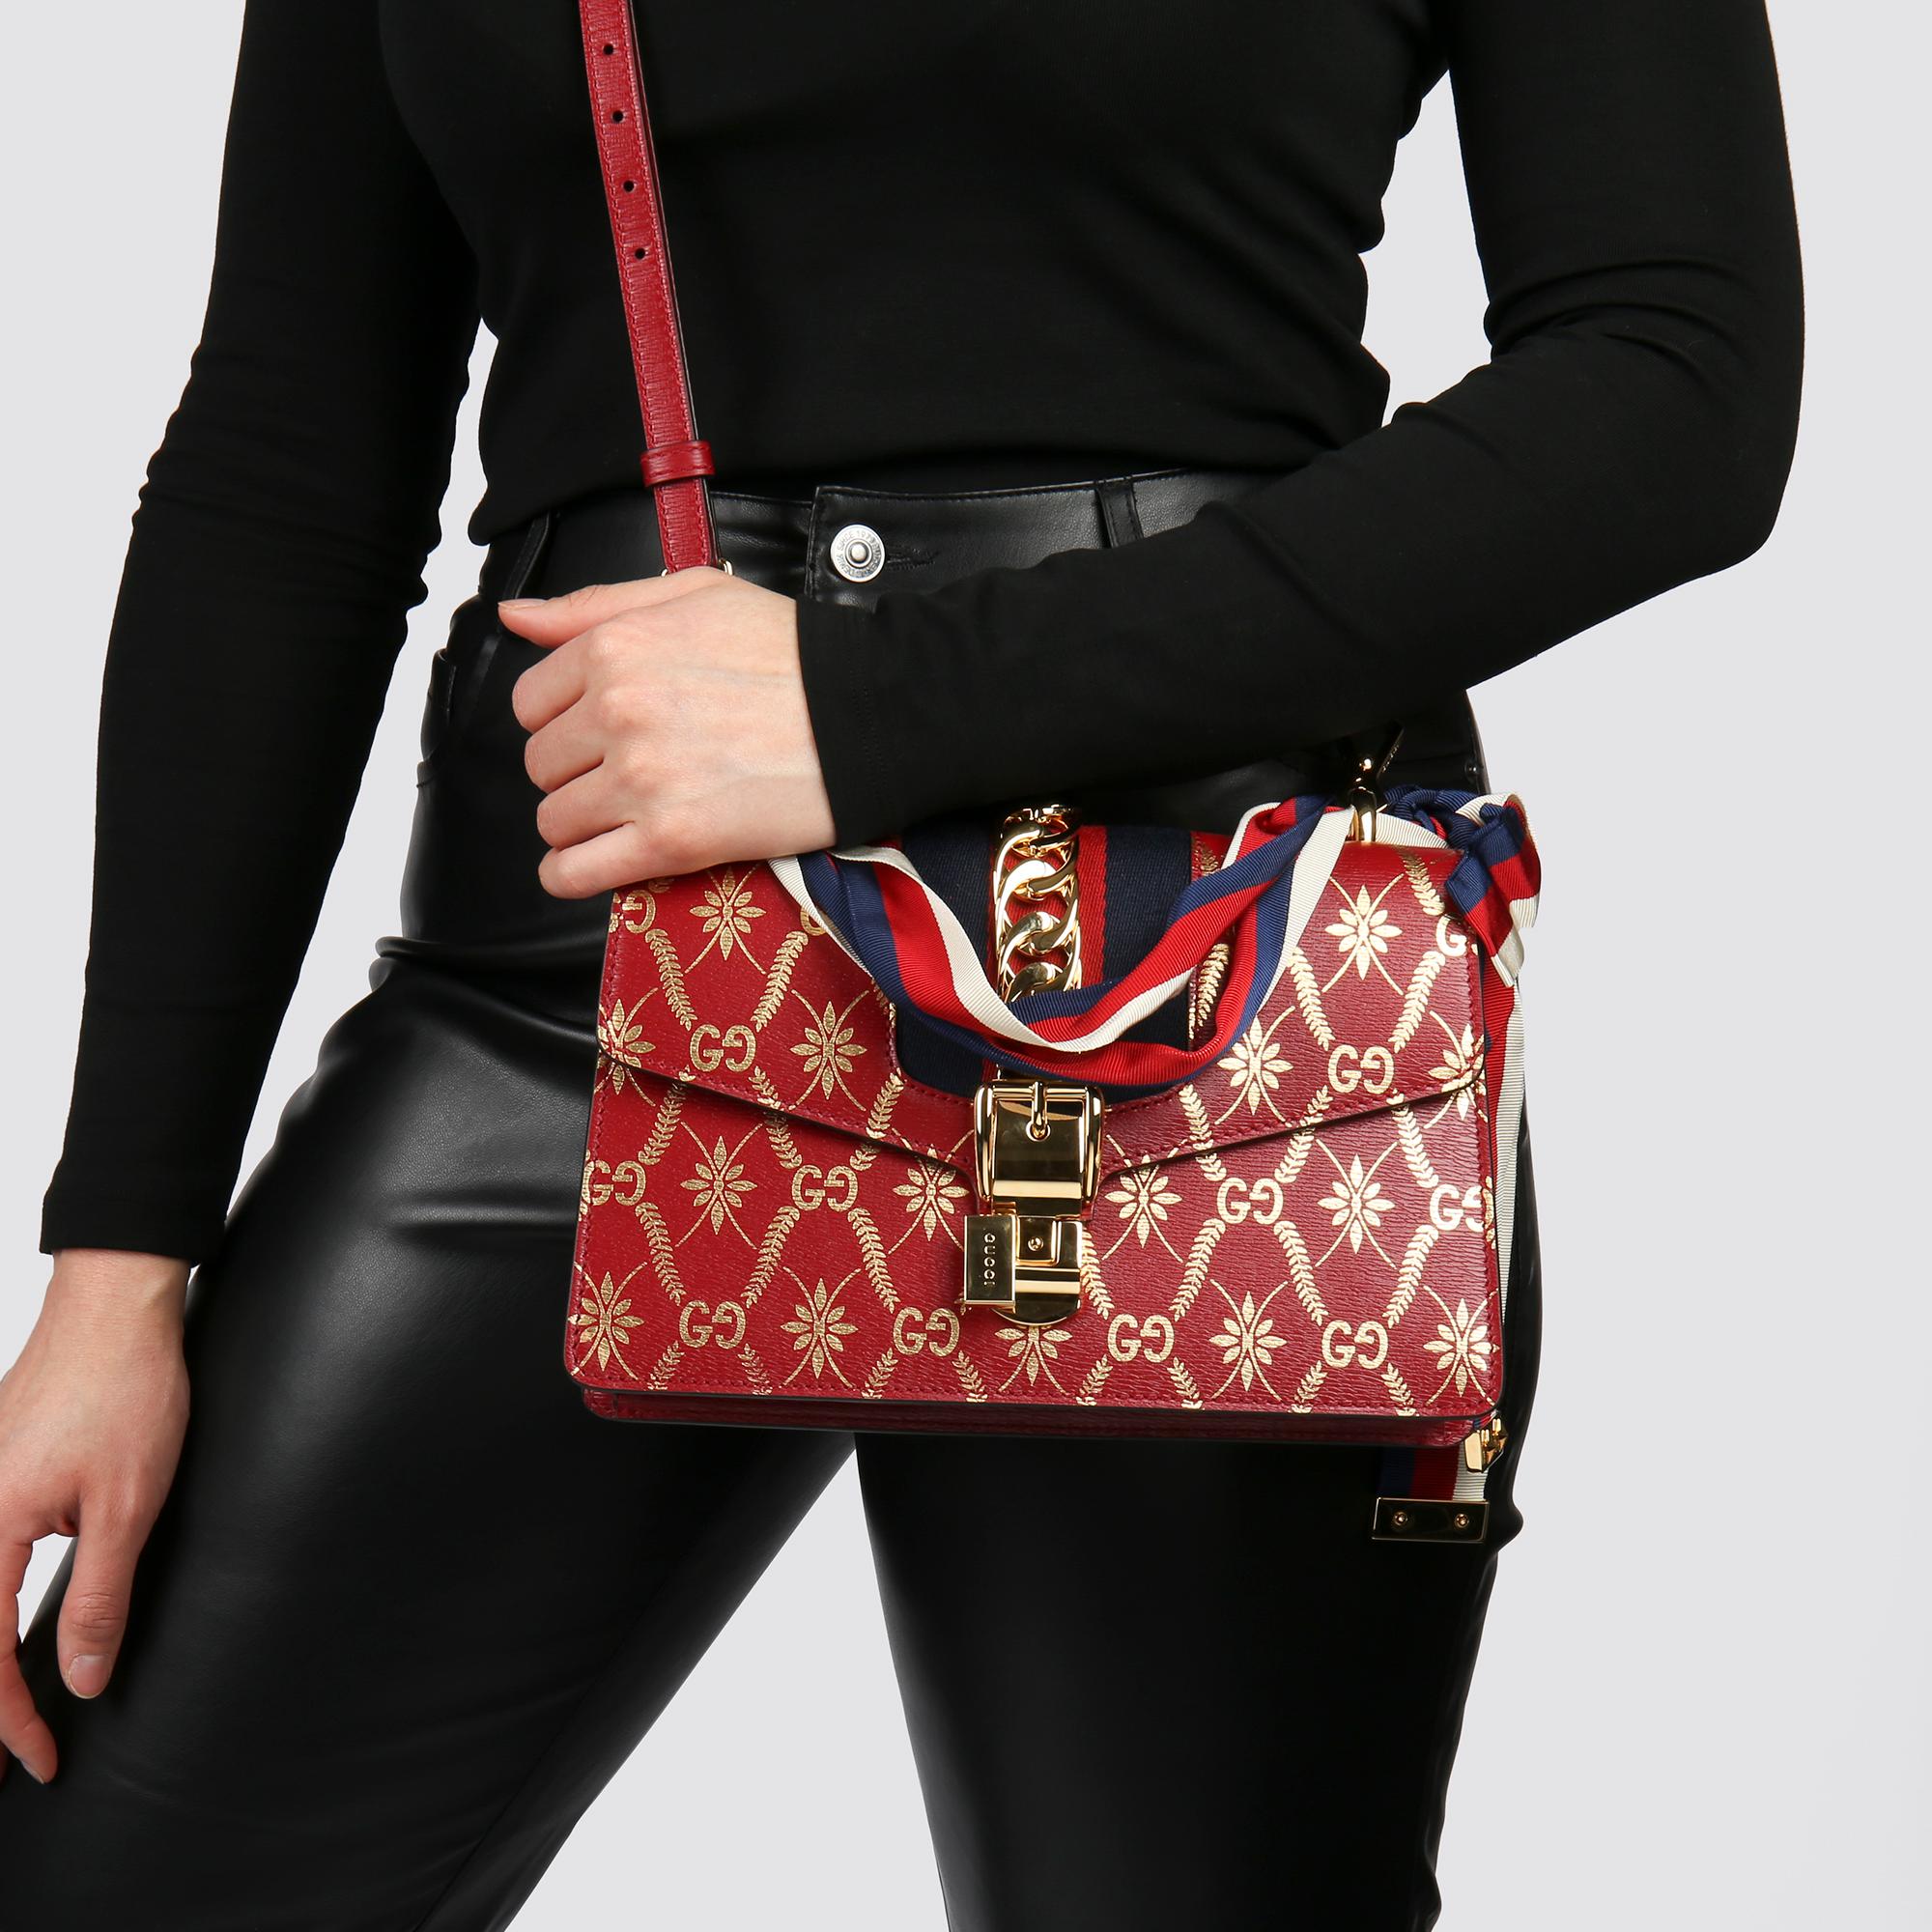 GUCCI
Red & Gold Calfskin Leather Top Handle Small Sylvie 

Xupes Reference: HB3766
Serial Number: 524401 493075
Age (Circa): 2021
Accompanied By: Gucci Dust Bag, Shoulder Strap
Authenticity Details: Date Stamp (Made in Italy) 
Gender: Ladies
Type: